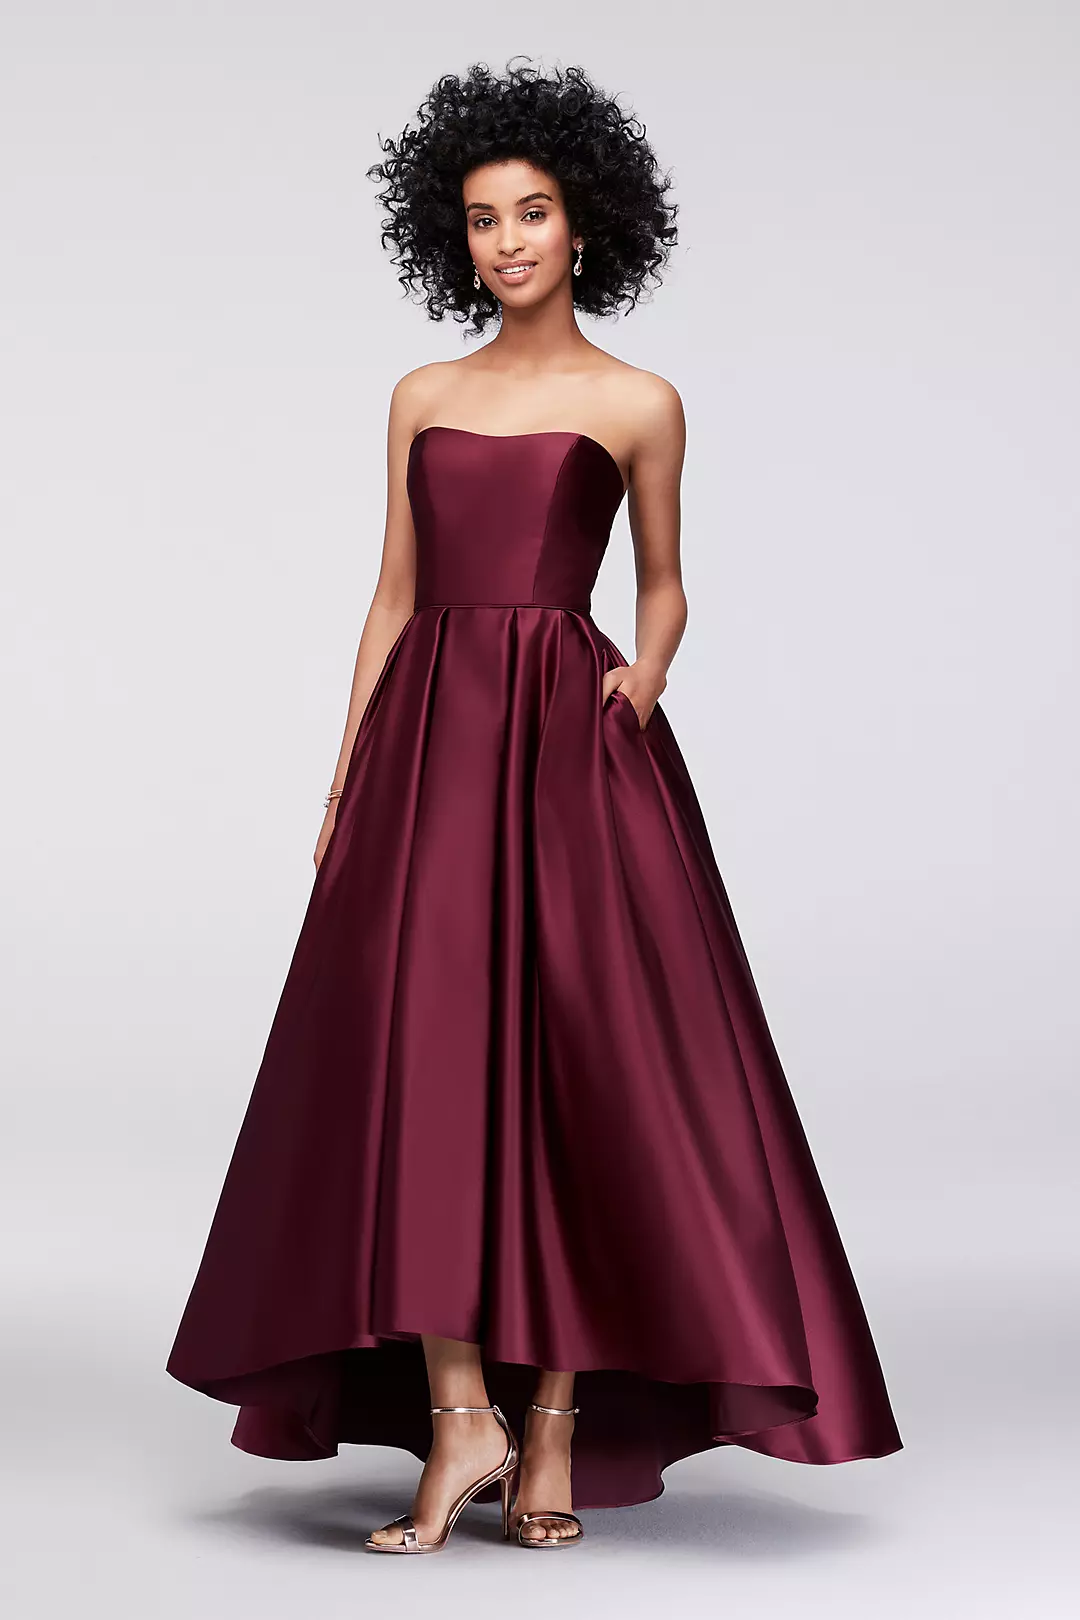 High-Low Lamour Satin Ball Gown Image